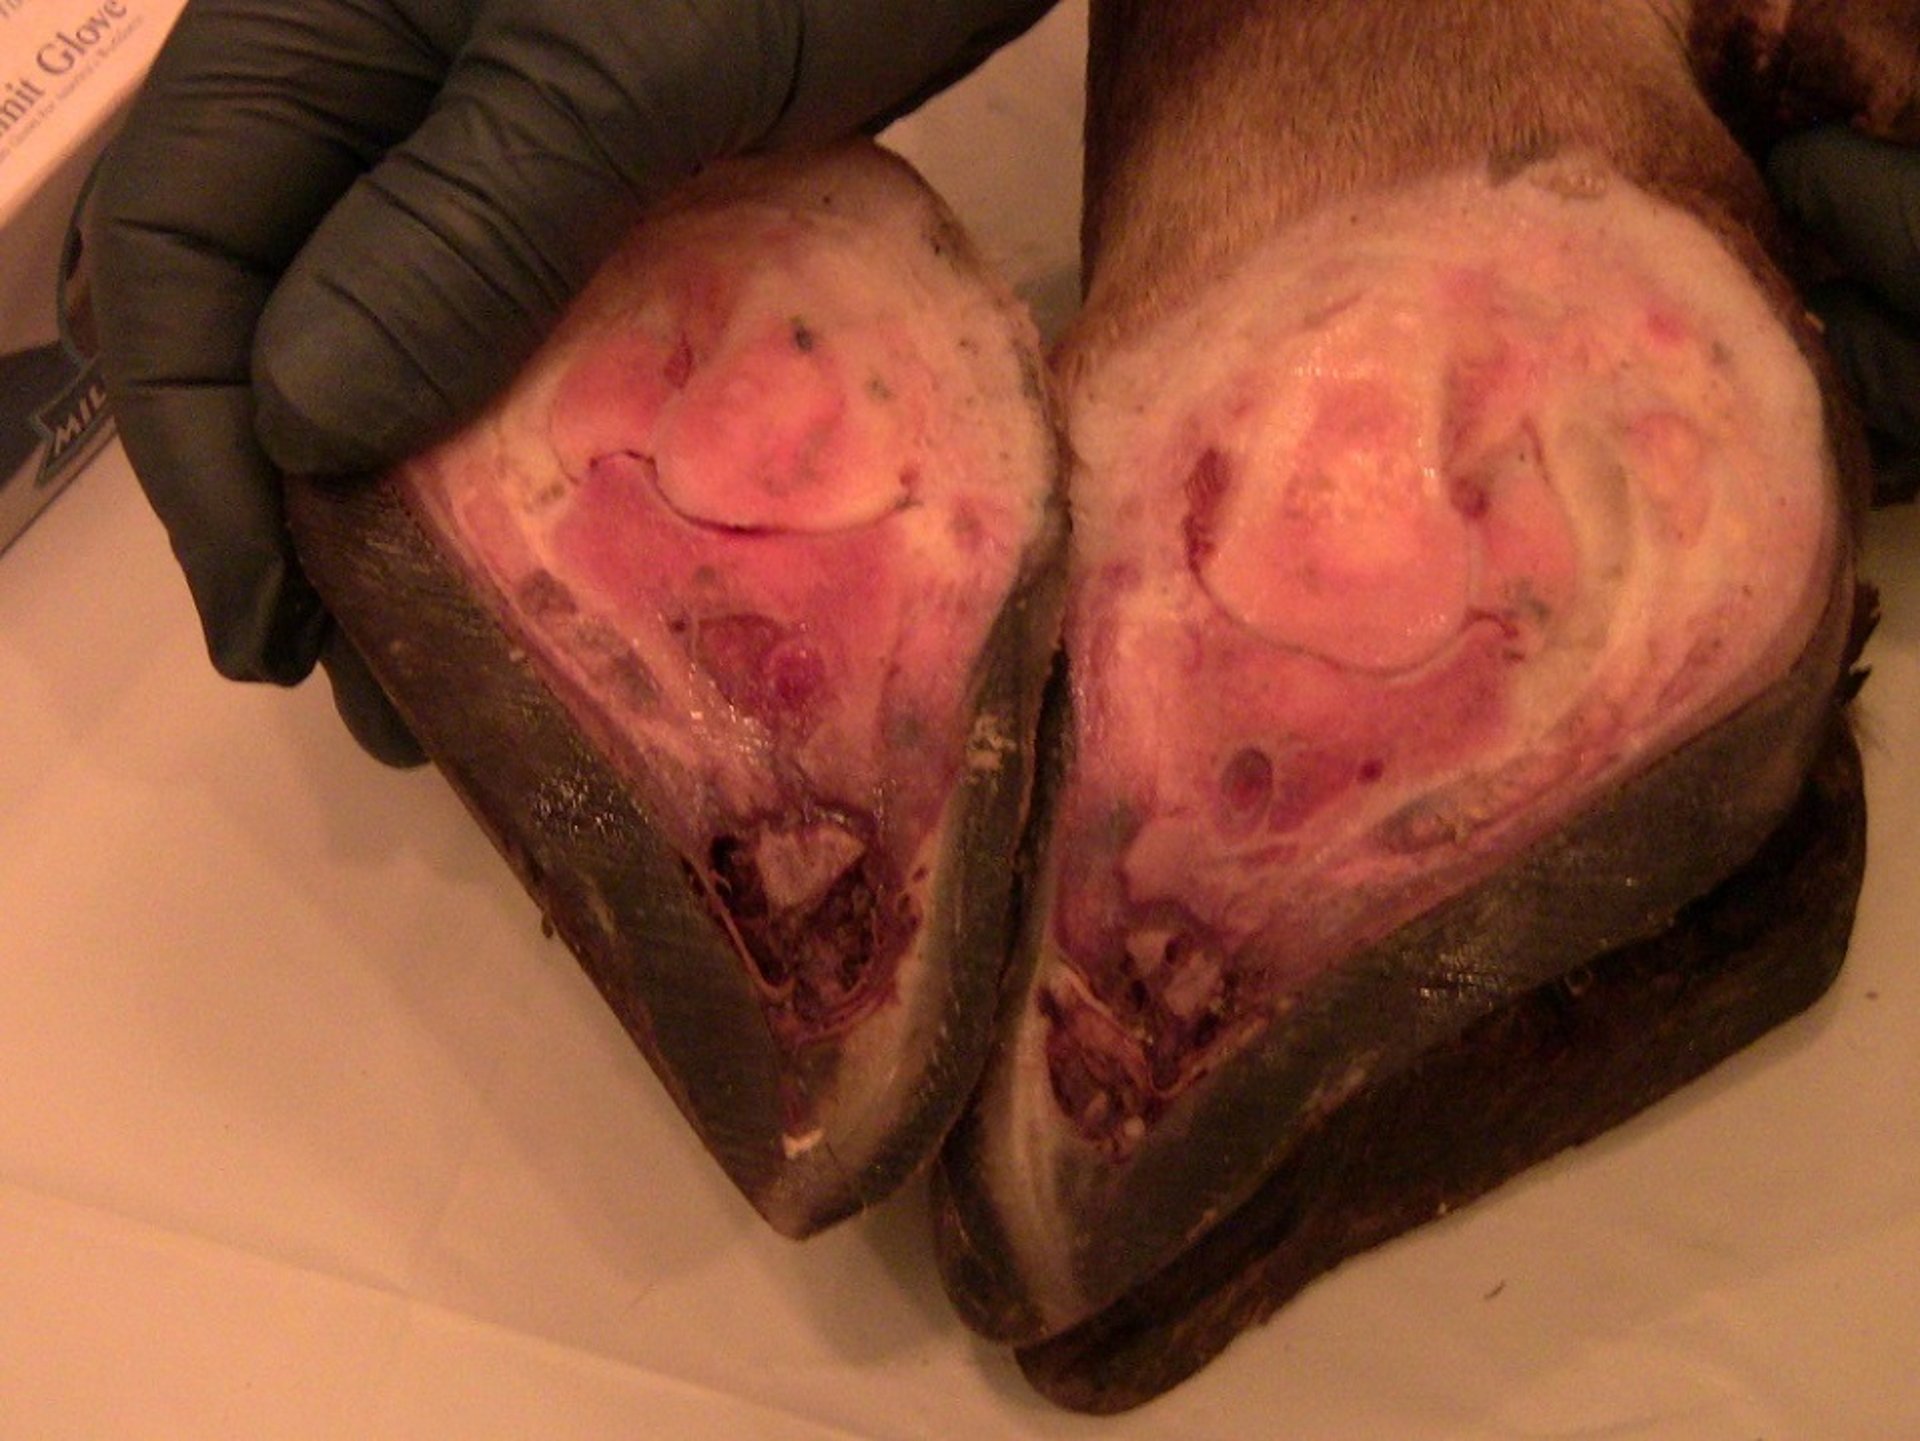 Post-mortem image of toe necrosis, cow